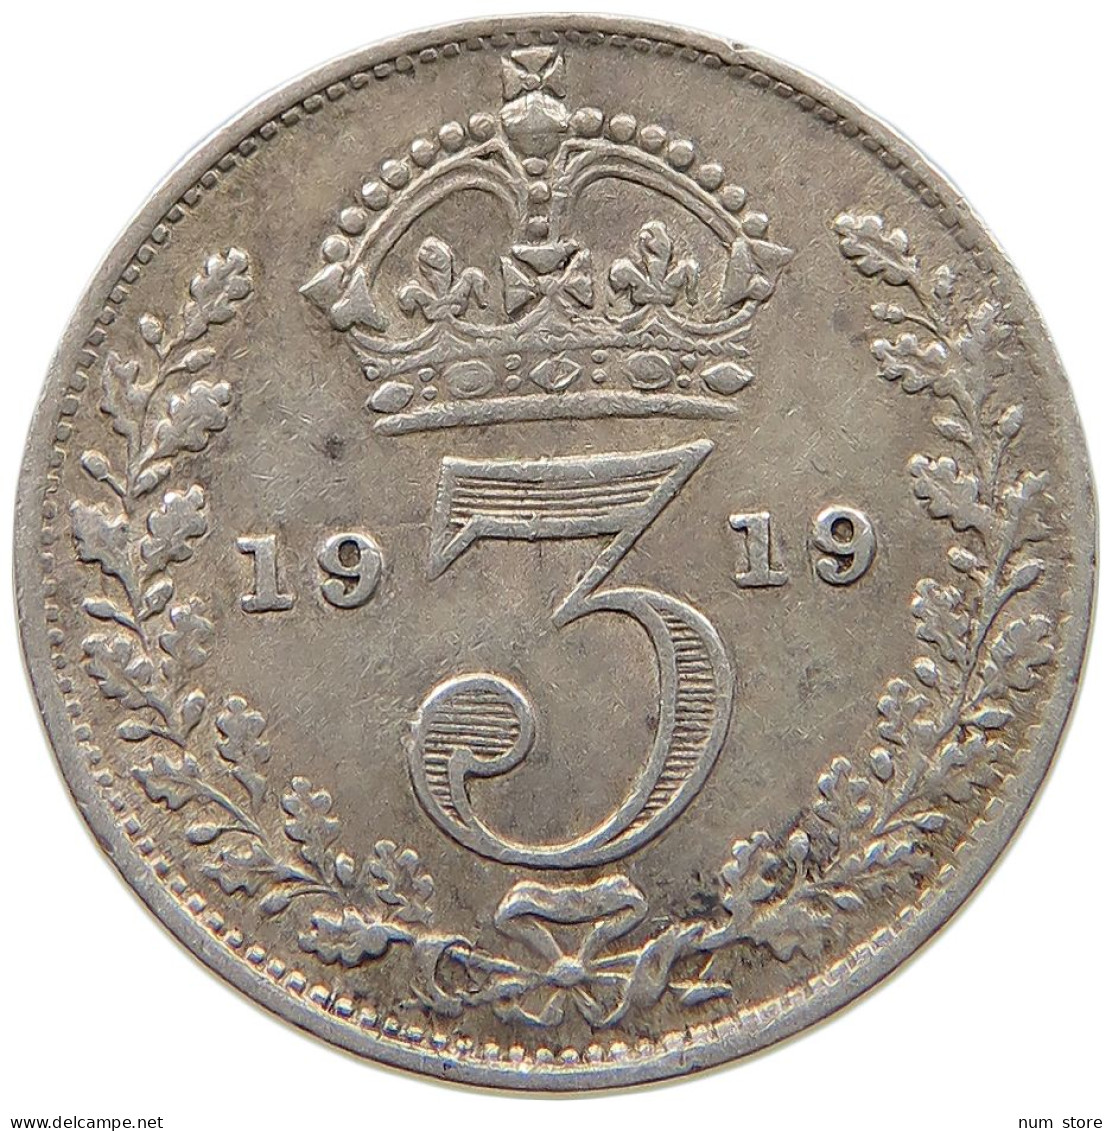 GREAT BRITAIN THREEPENCE 1919 #s059 0607 - F. 3 Pence